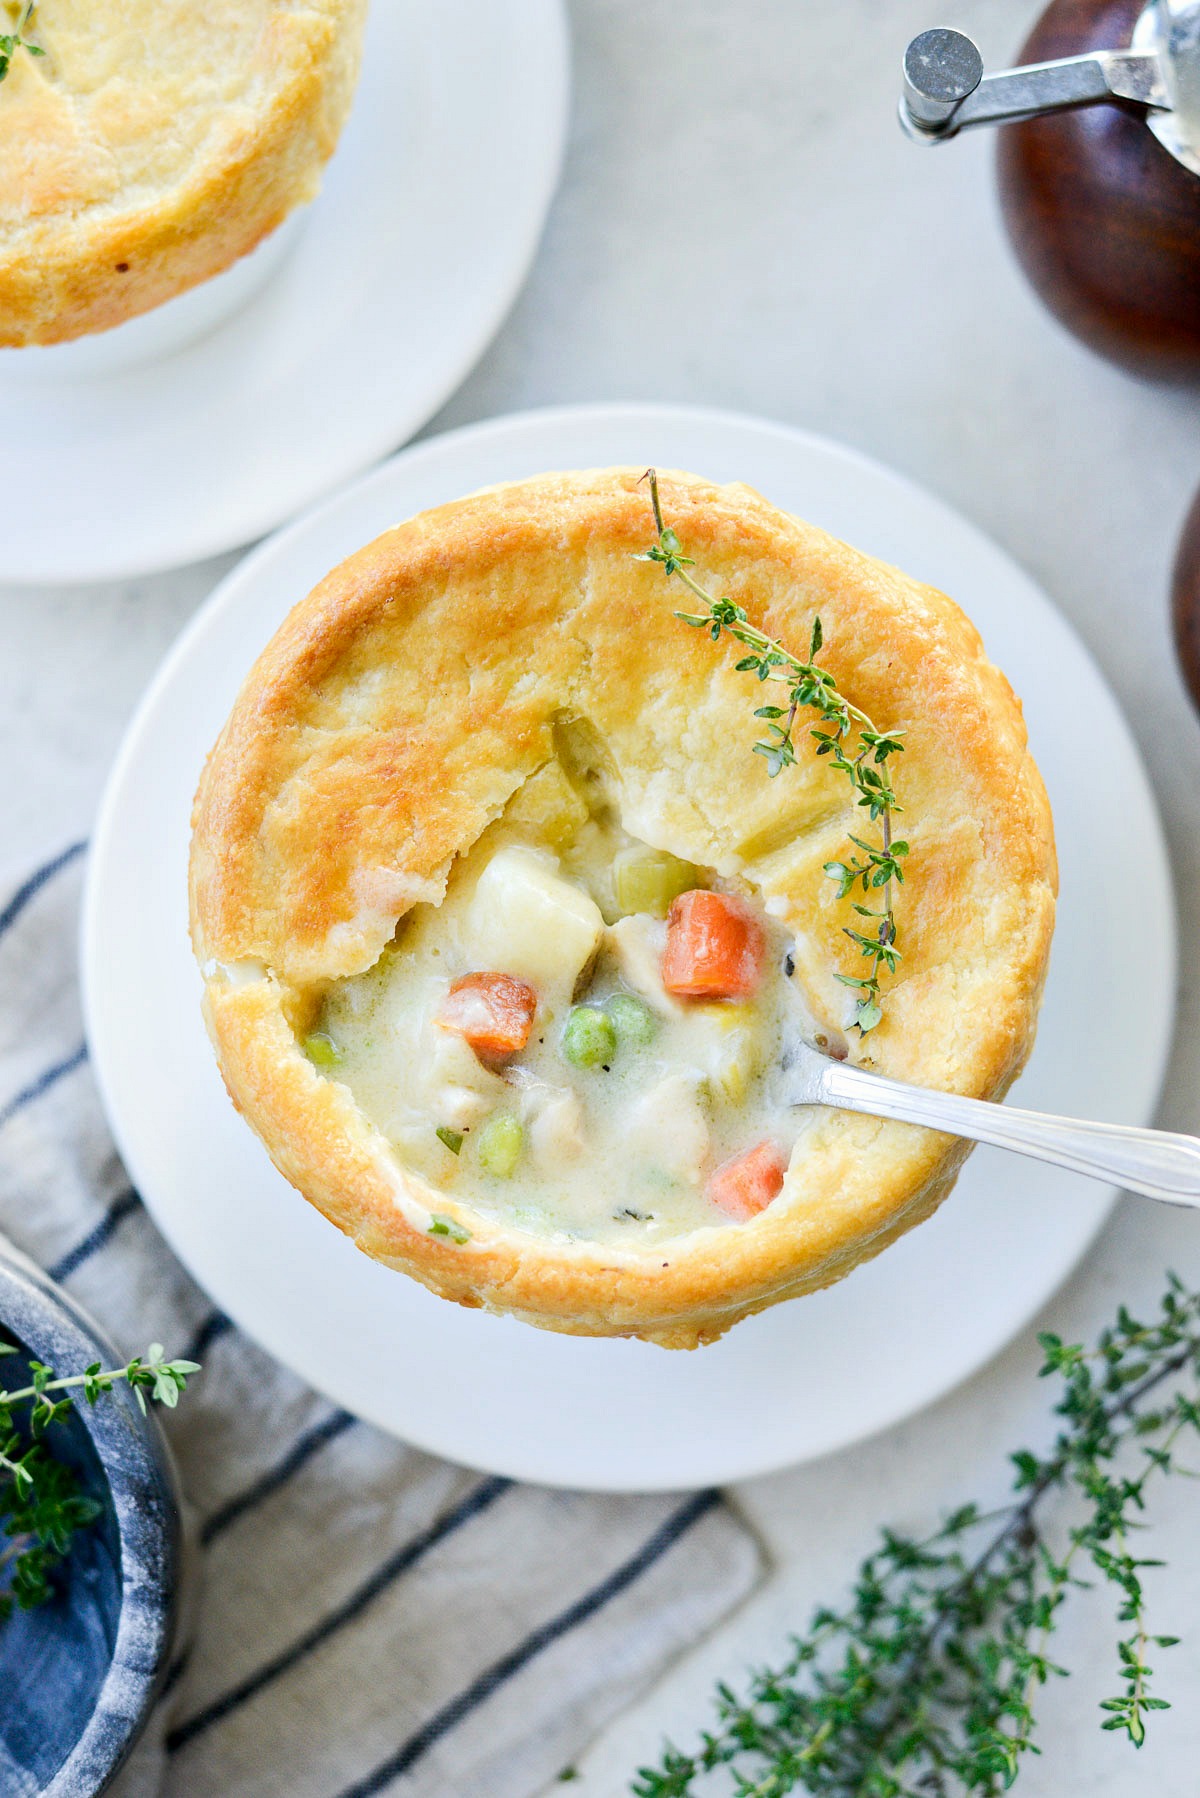 Smoked Chicken Pot Pie Recipe! - That Guy Who Grills